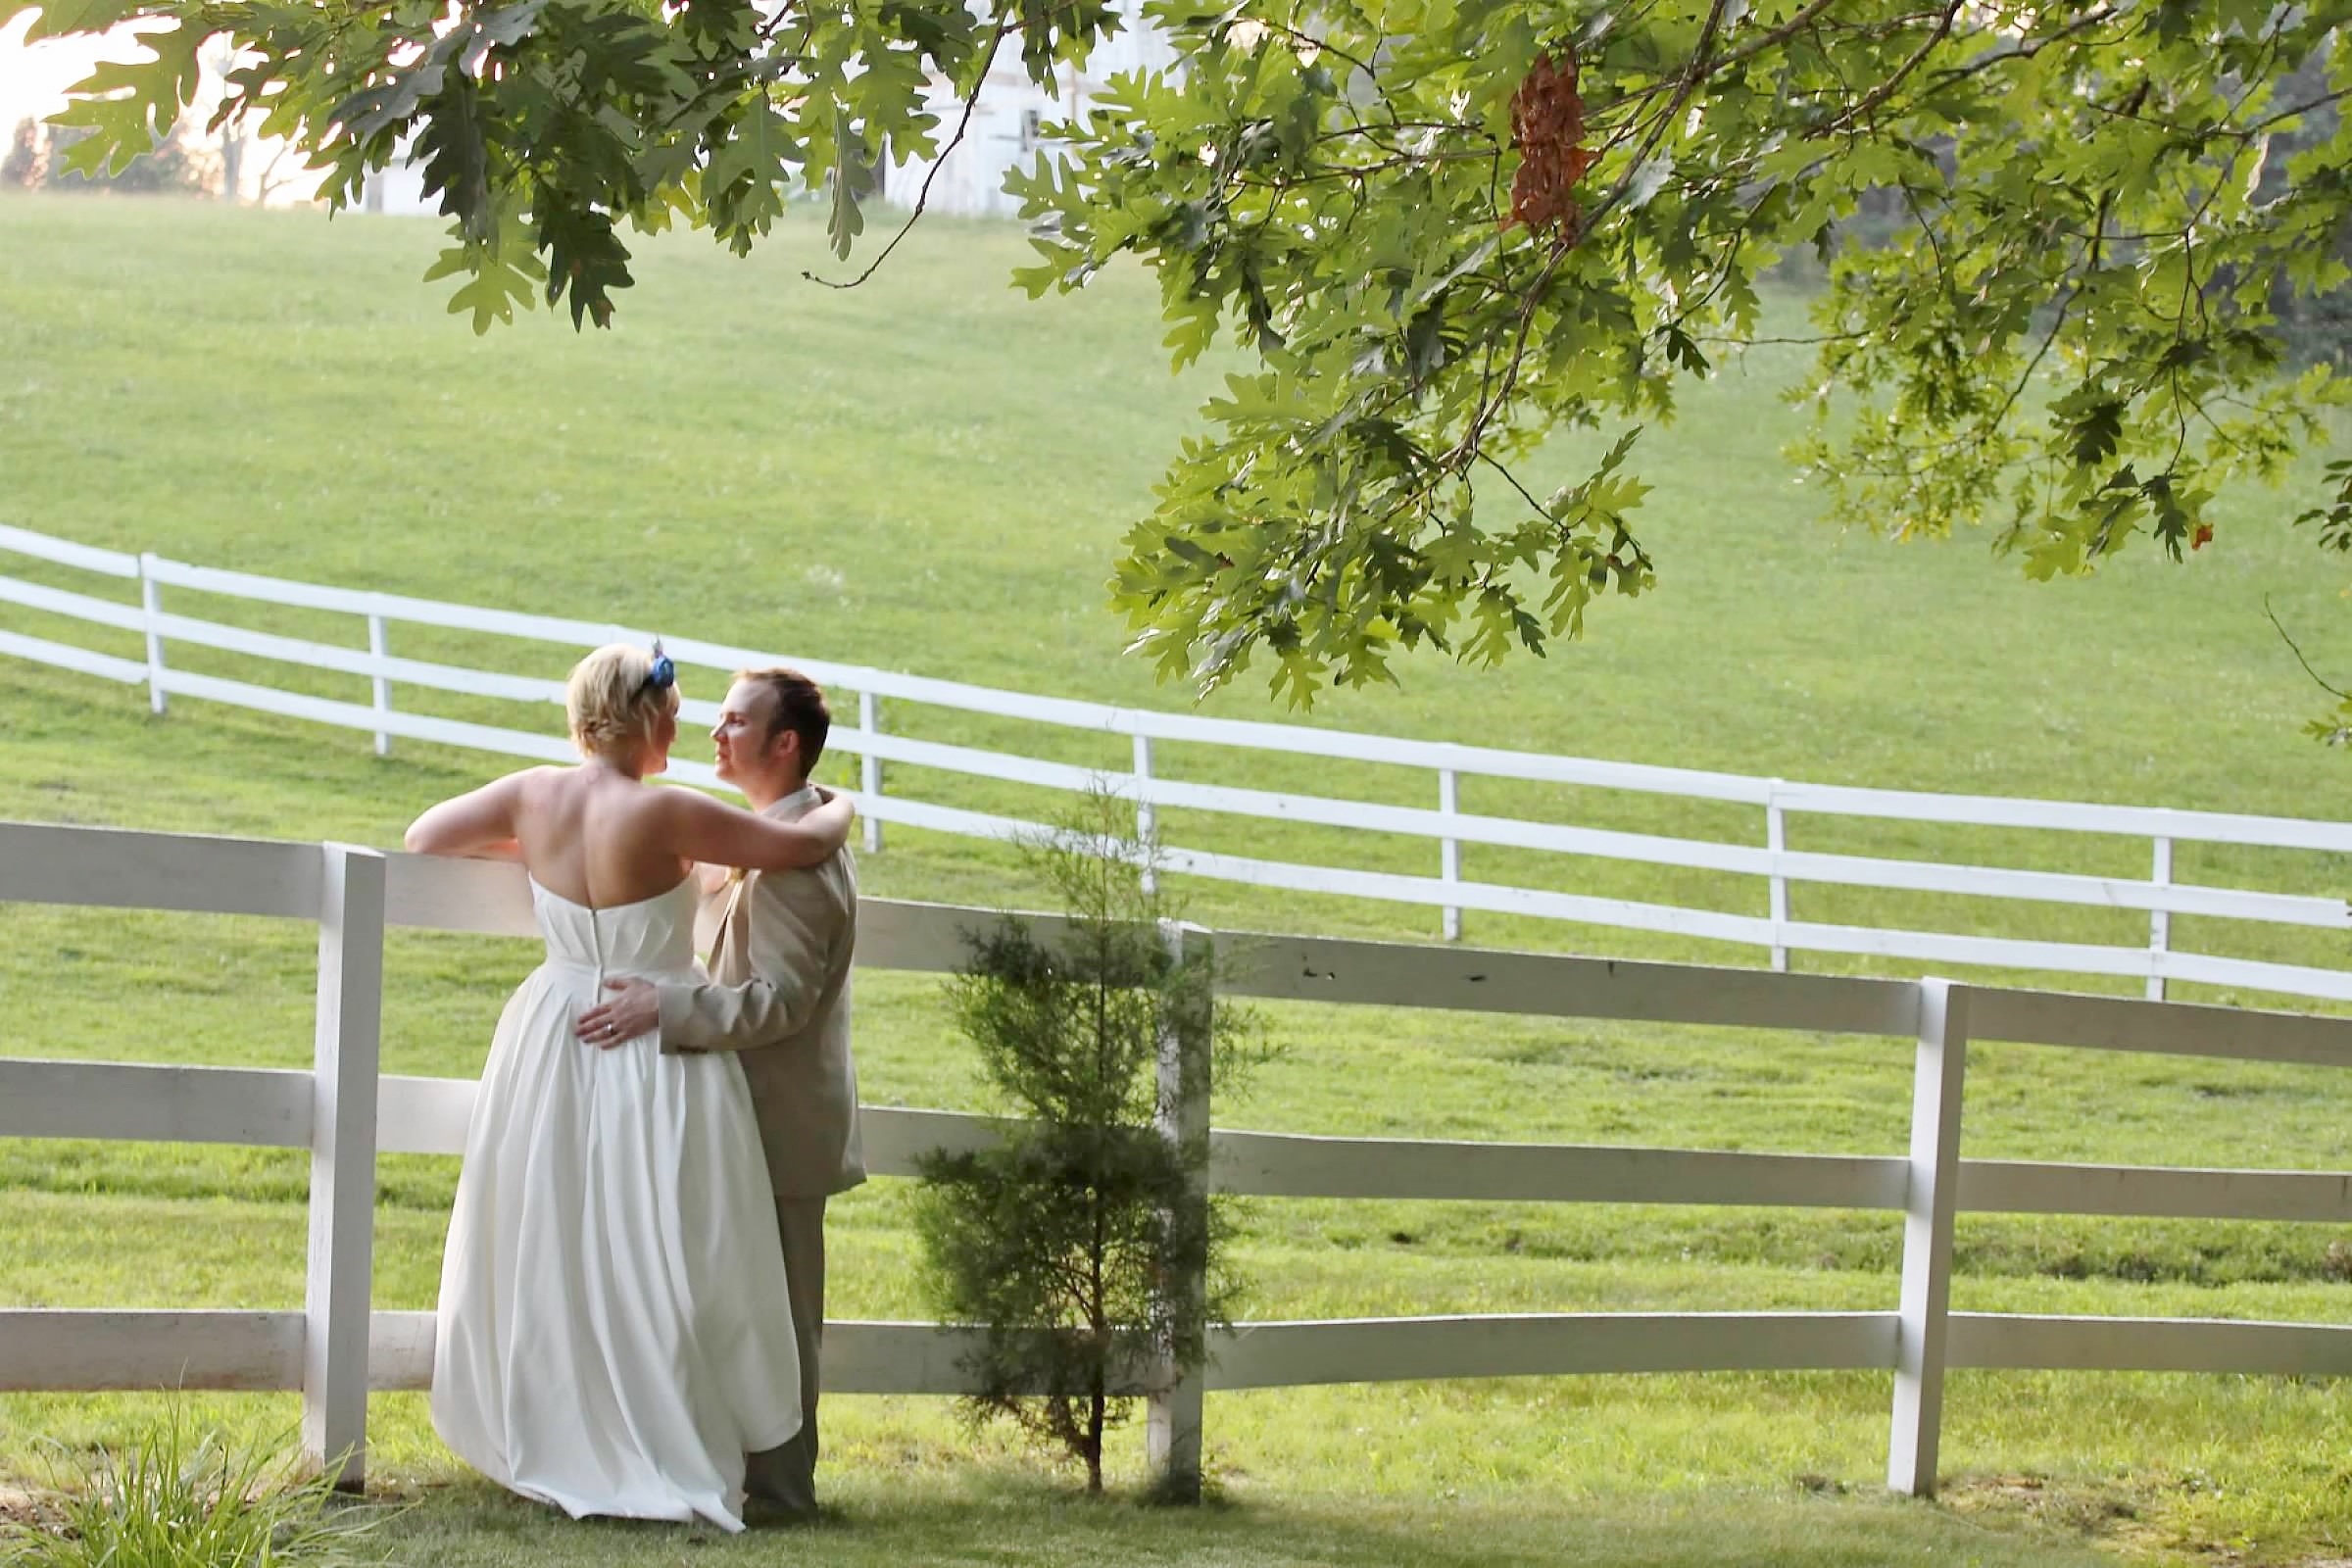 Bride and groom share tender moment alone.